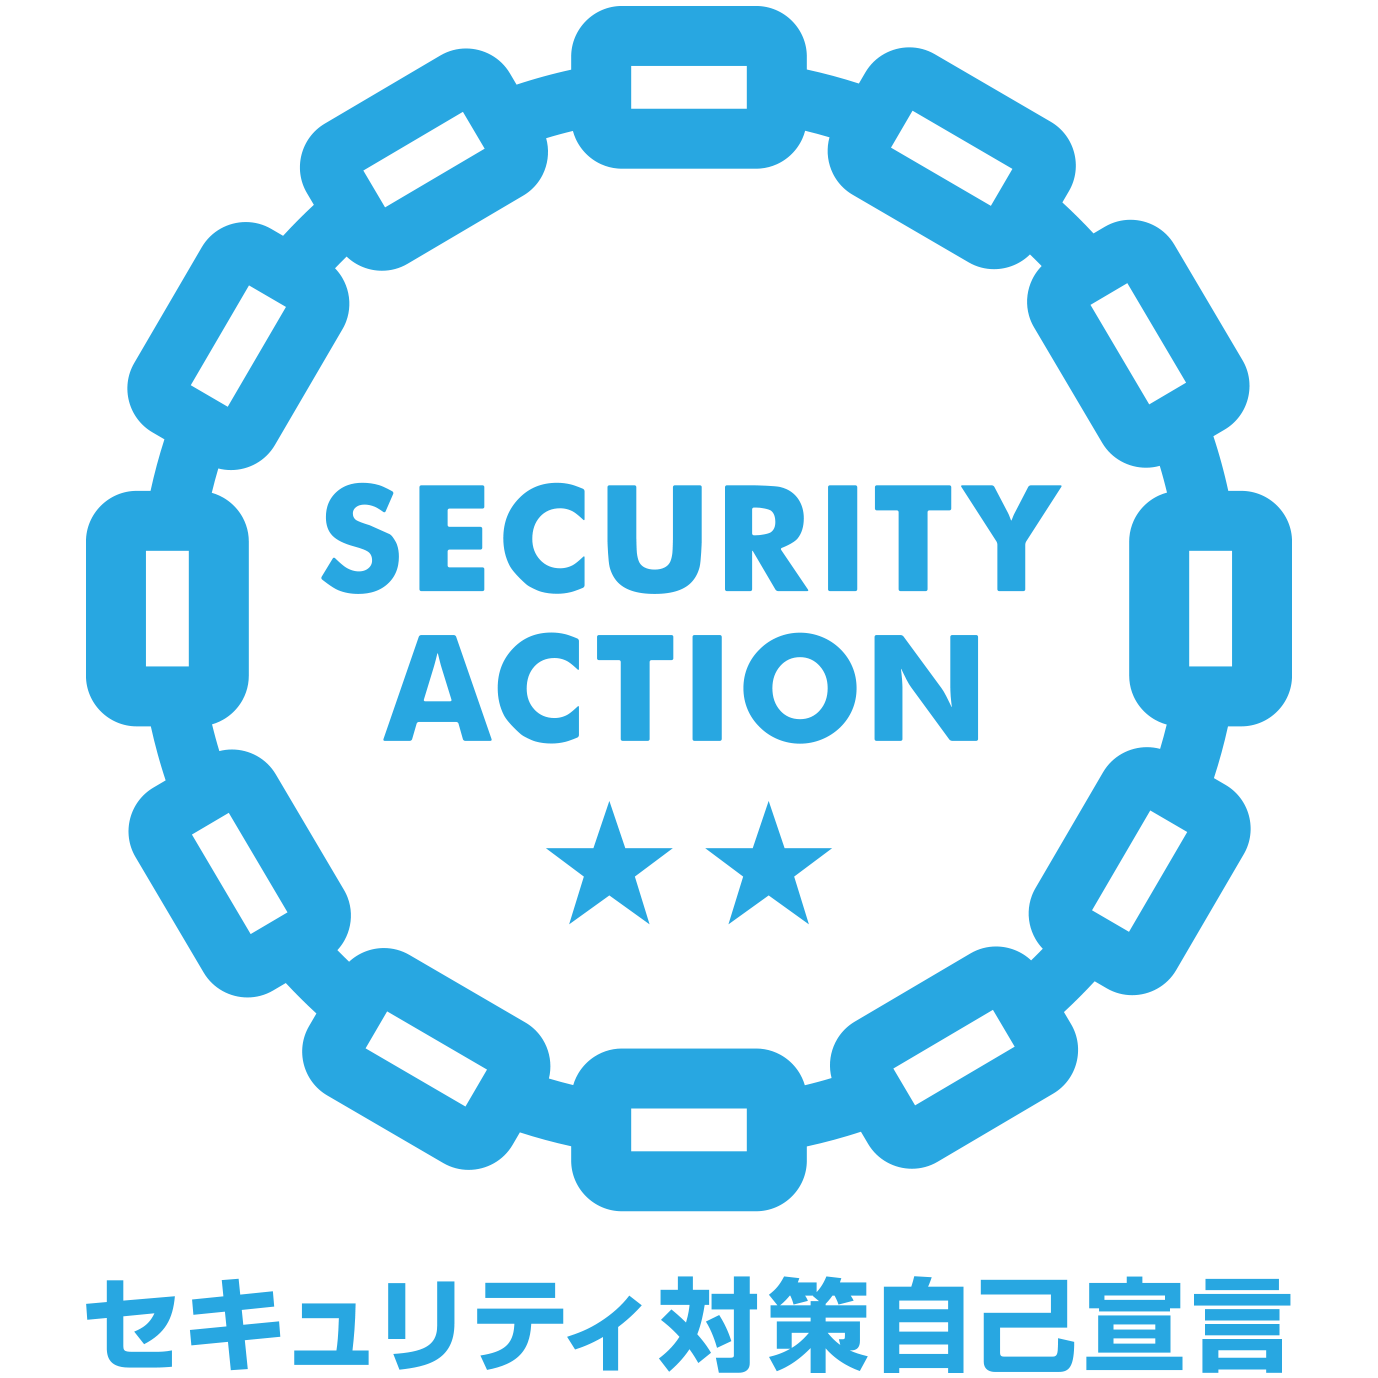 SECURITY ACTION（セキュリティアクション）